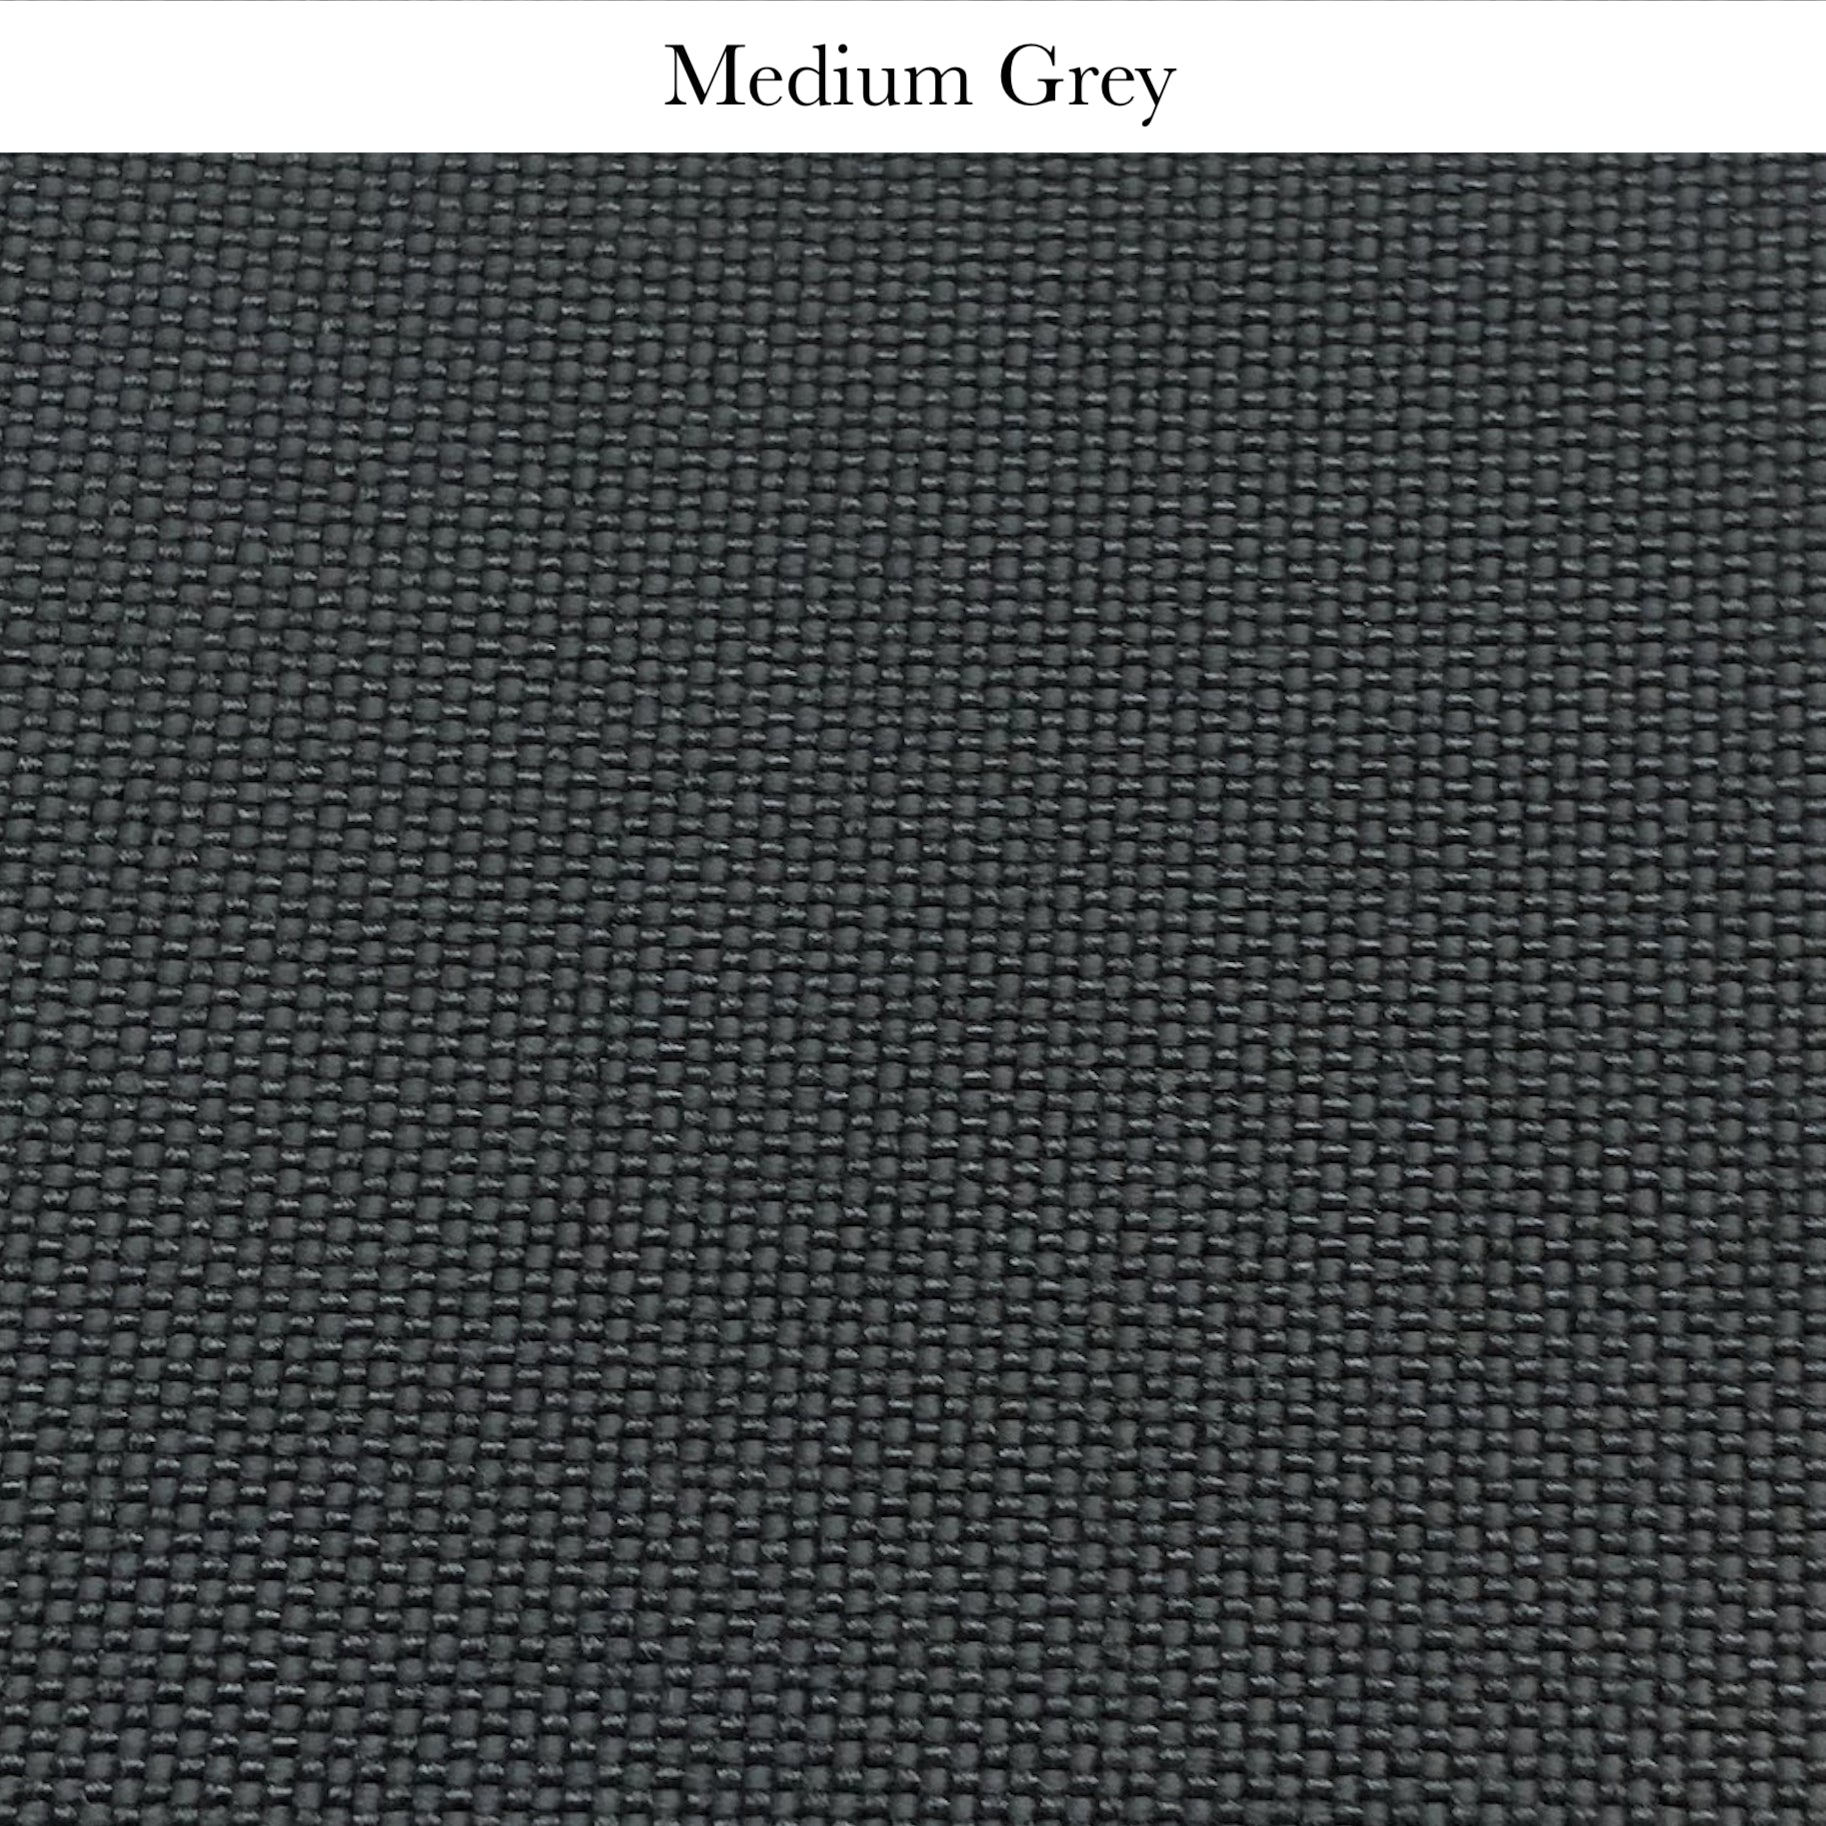 Buy China Wholesale Durable Cloth Plain Dyed 1000d Polyester Cordura Fabric  For Making Bag, Tent & Cordura Fabric $1.79